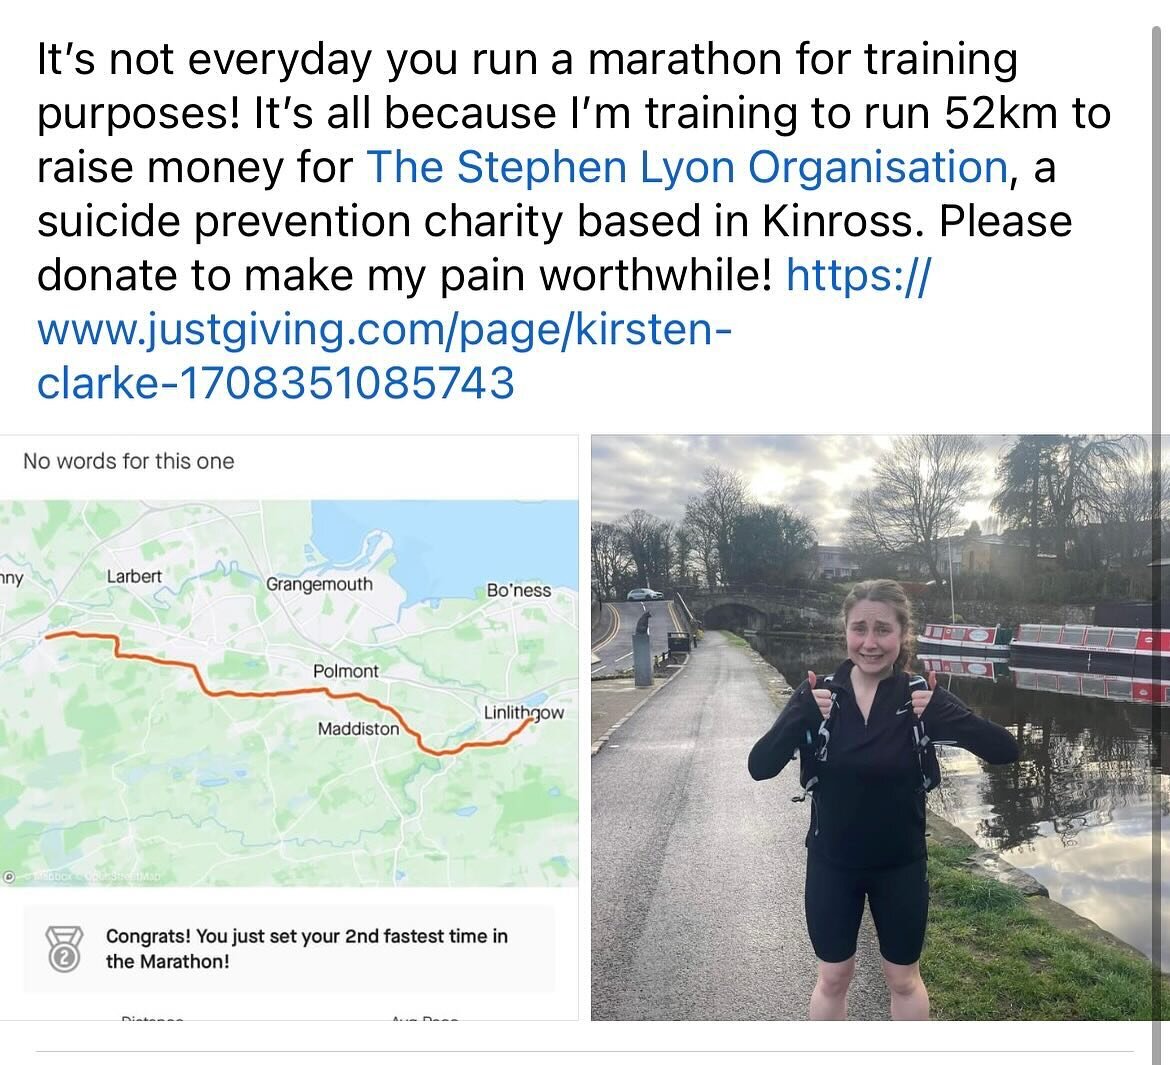 A massive thank you to Kirsten Clarke for running this marathon and donating the money to us. We plan to make the day a great experience for all and we will be behind Kirsten all the way!

You can donate via the link to the JustGiving page which is b